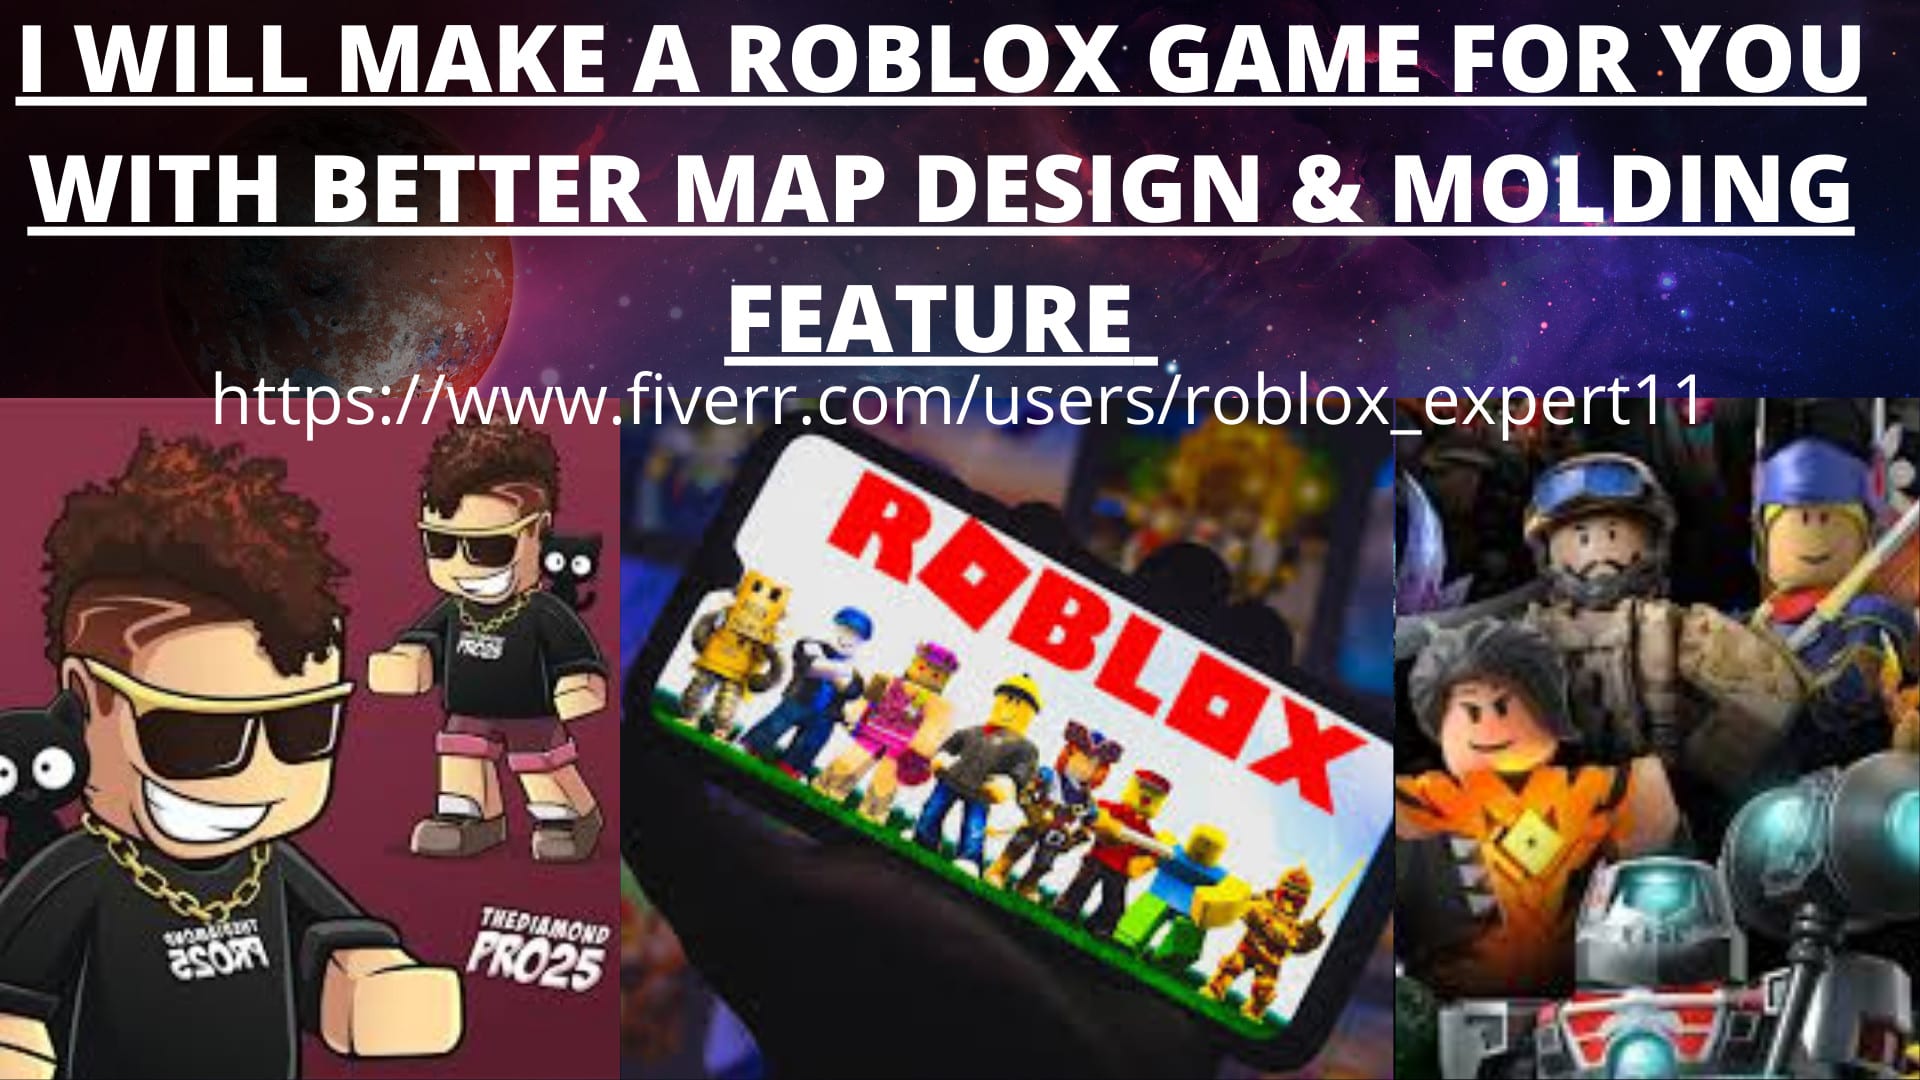 Do Premium Design For Your Roblox Games Completely By Roblox Expert11 Fiverr - roblox premium in canadian